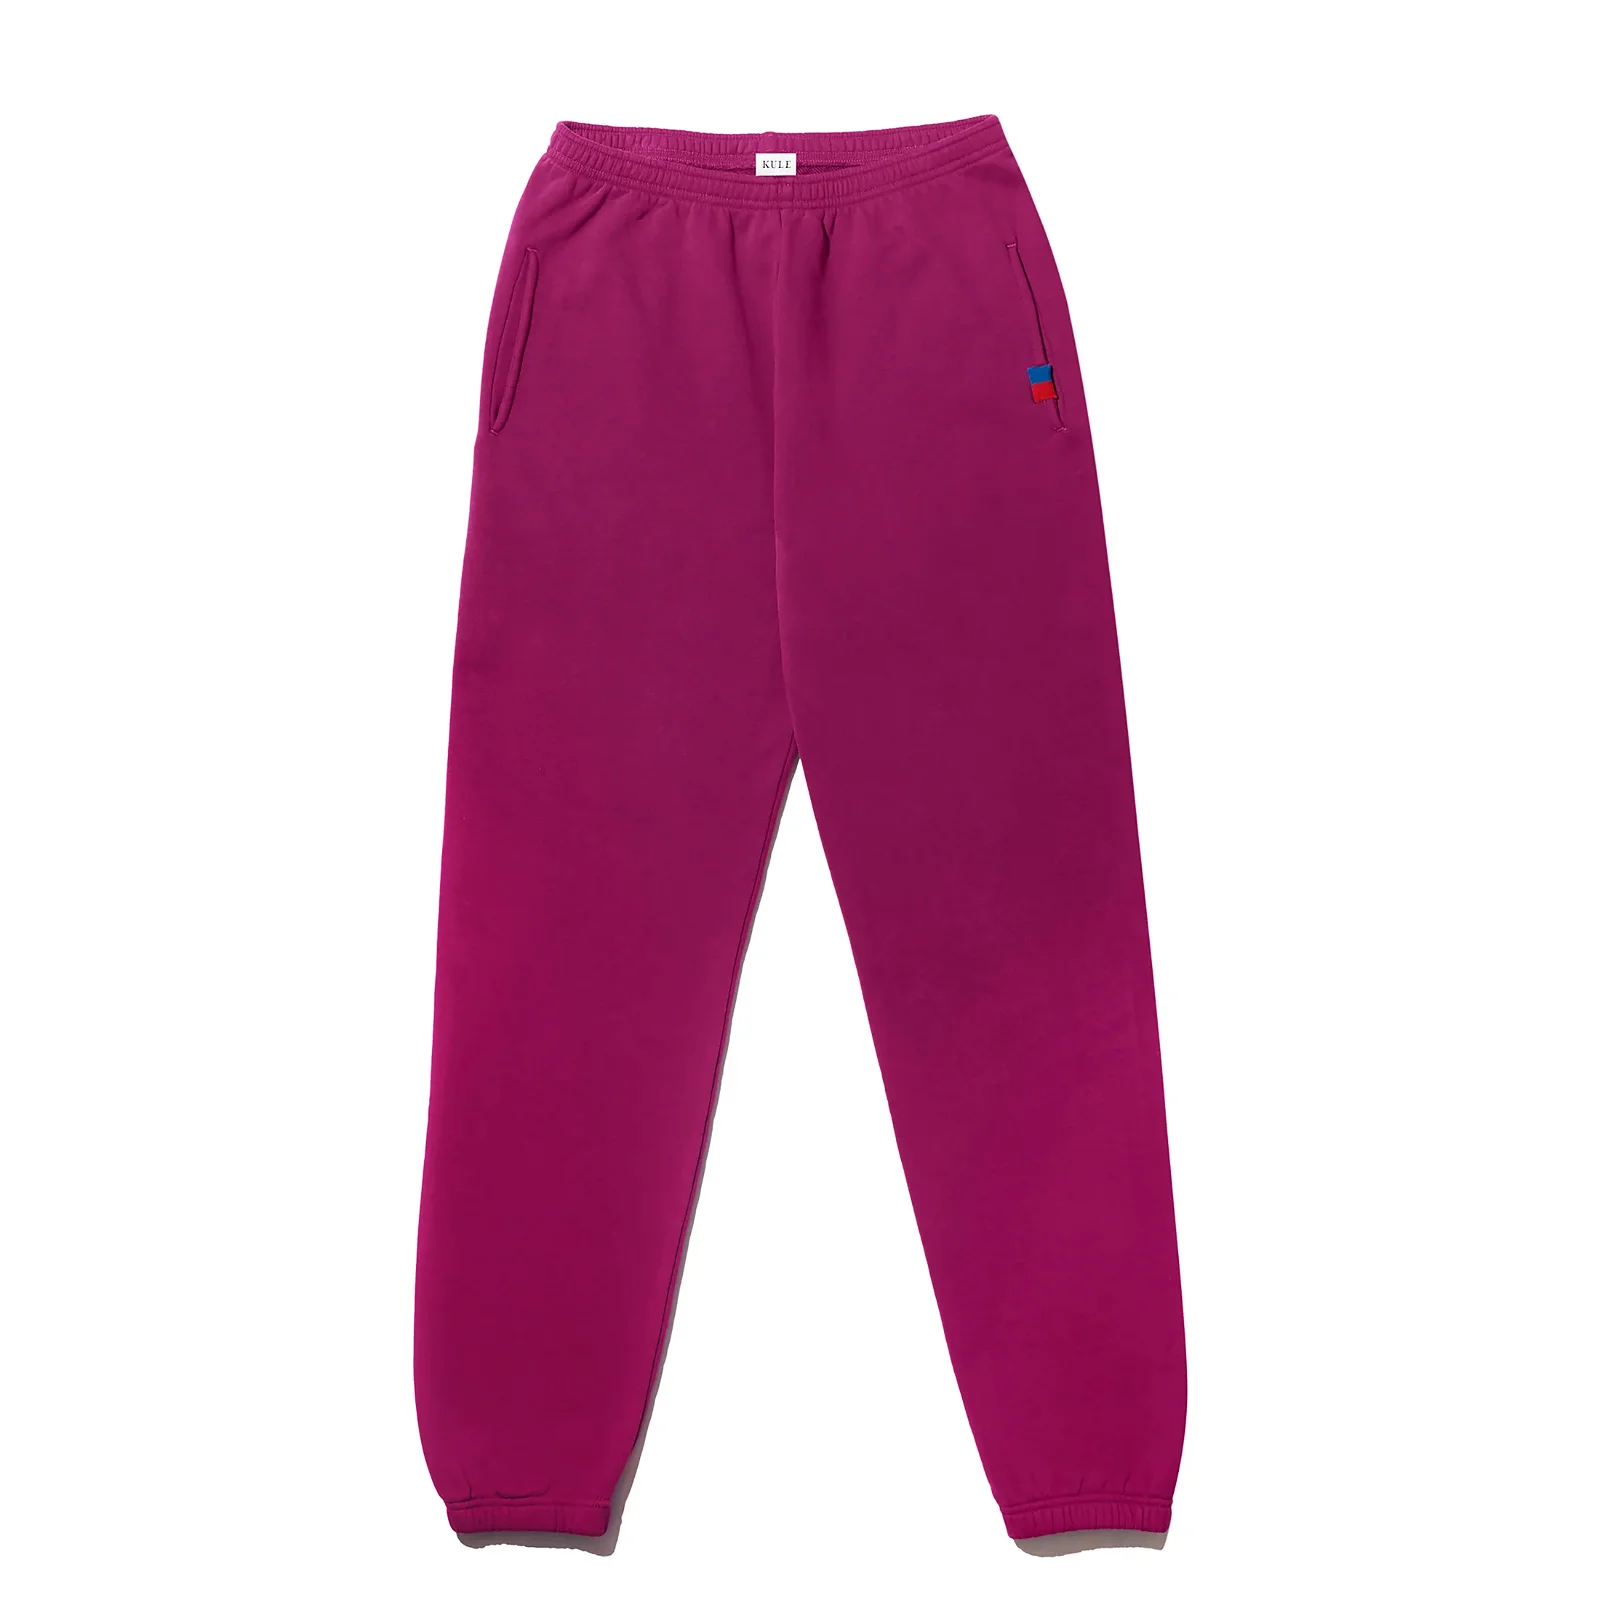 Image of The Sweatpants - French Plum